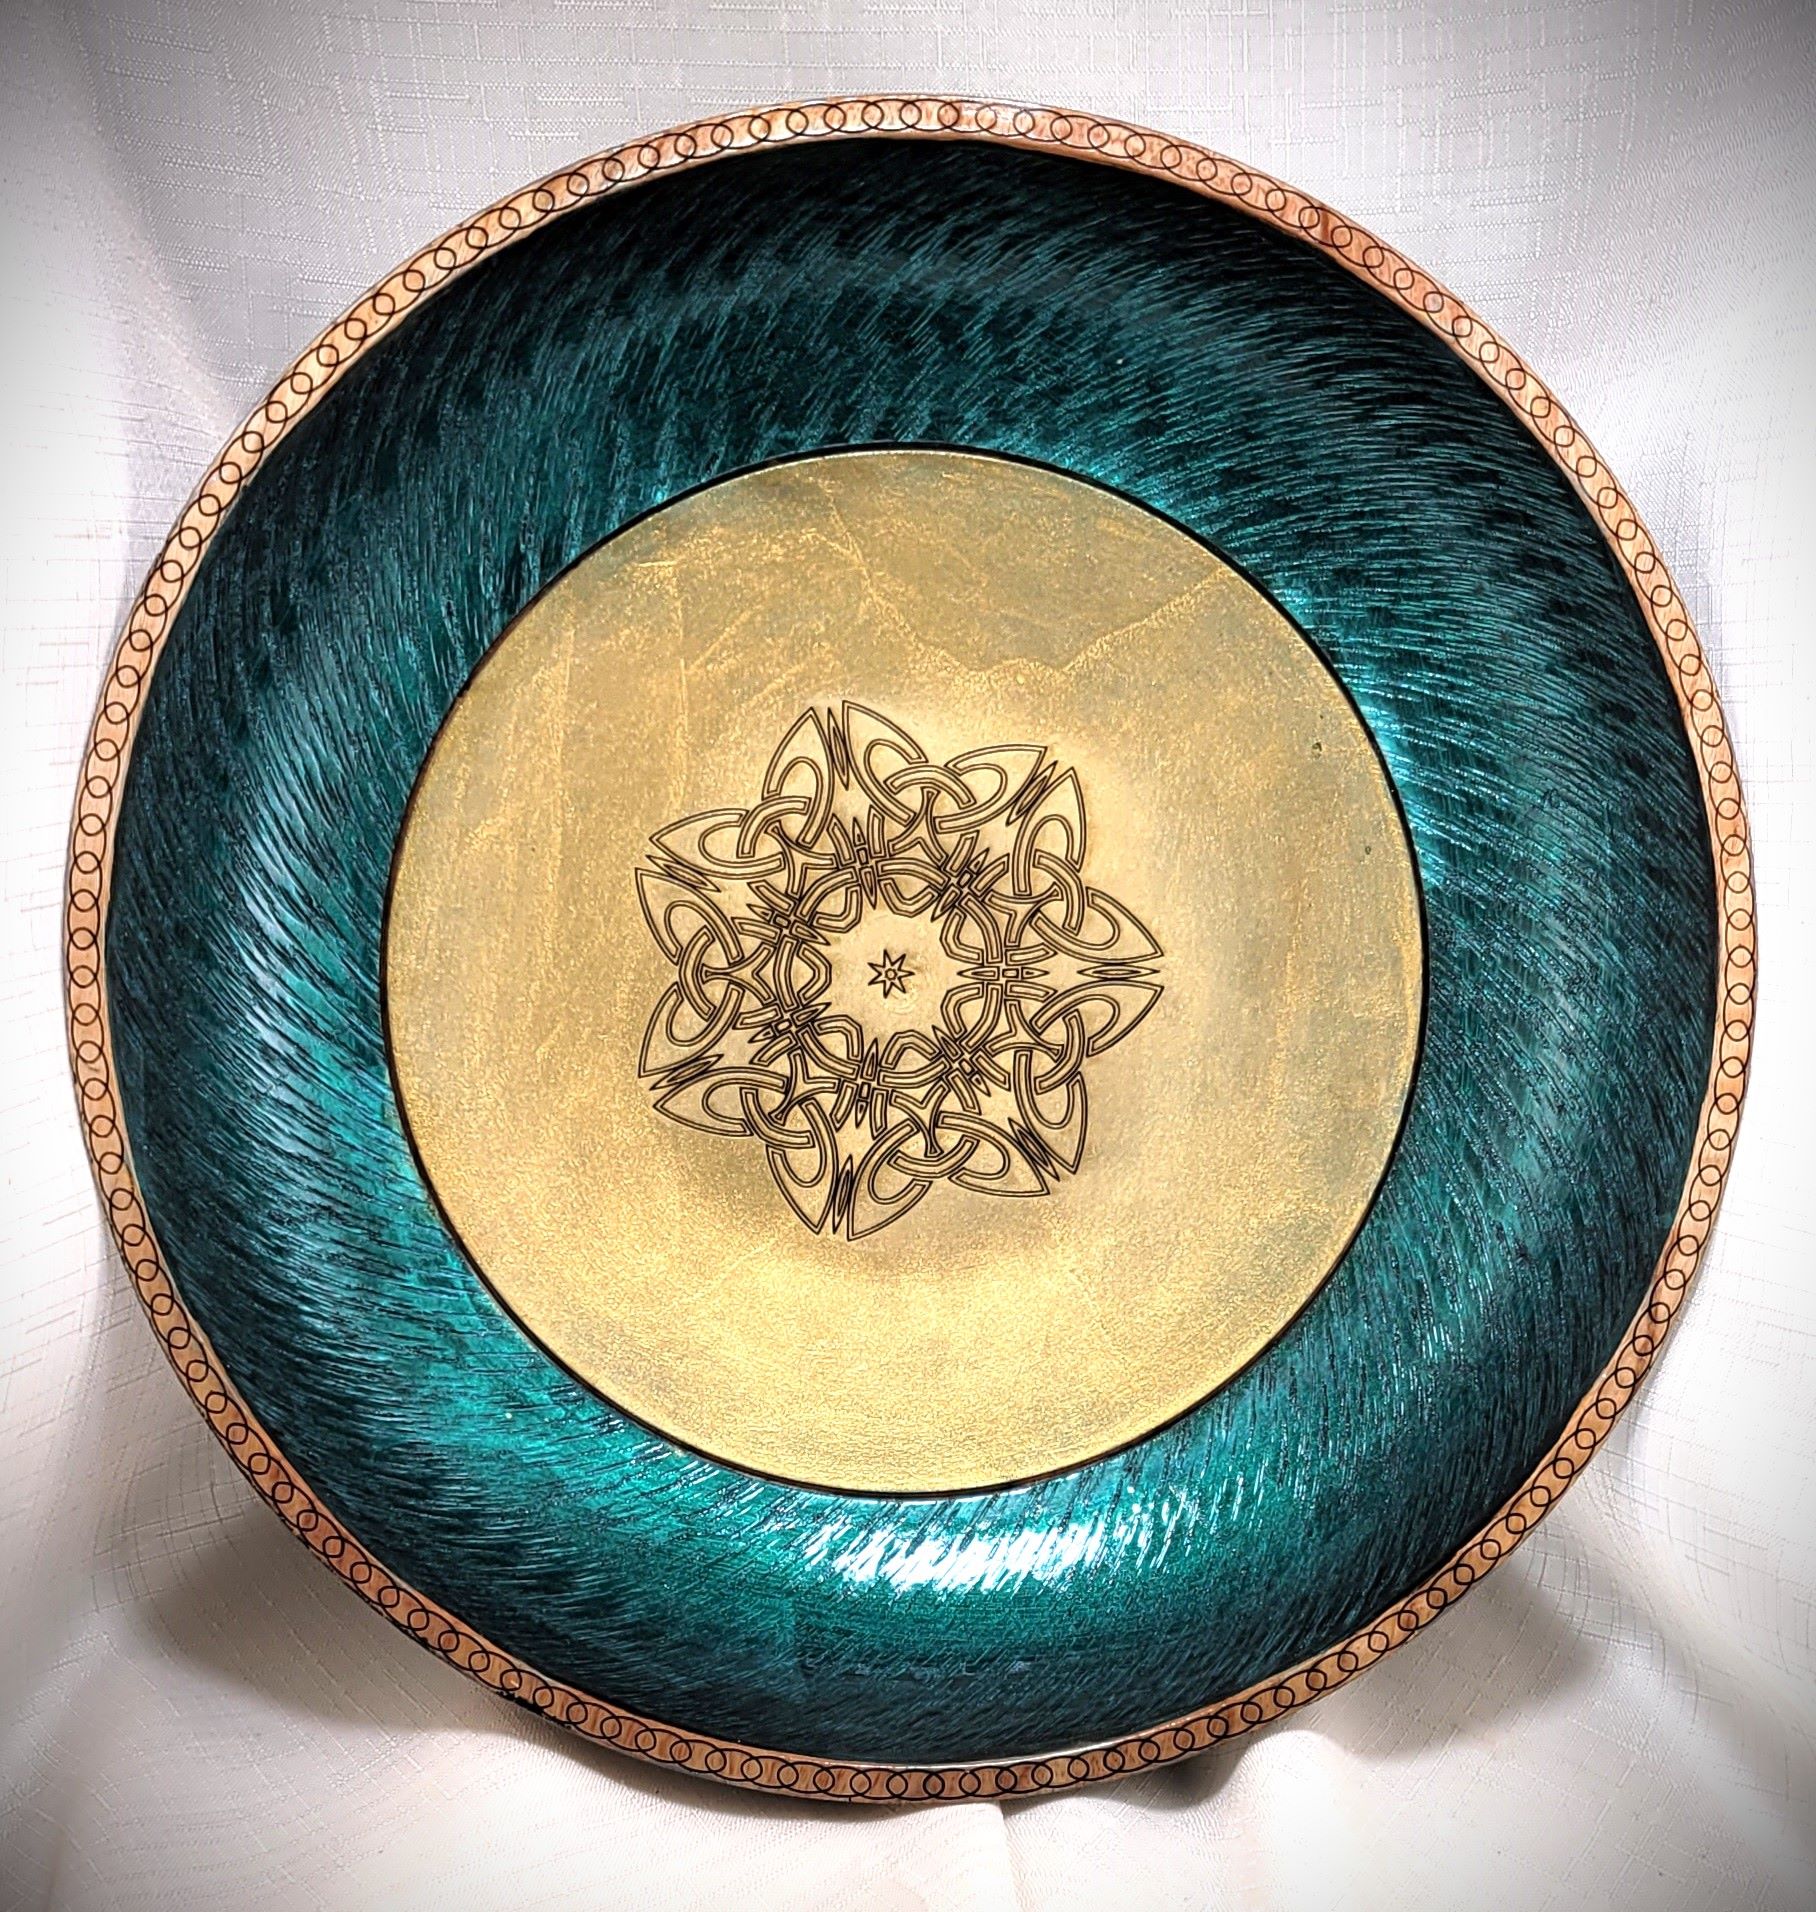 Textured and Engraved Bowl